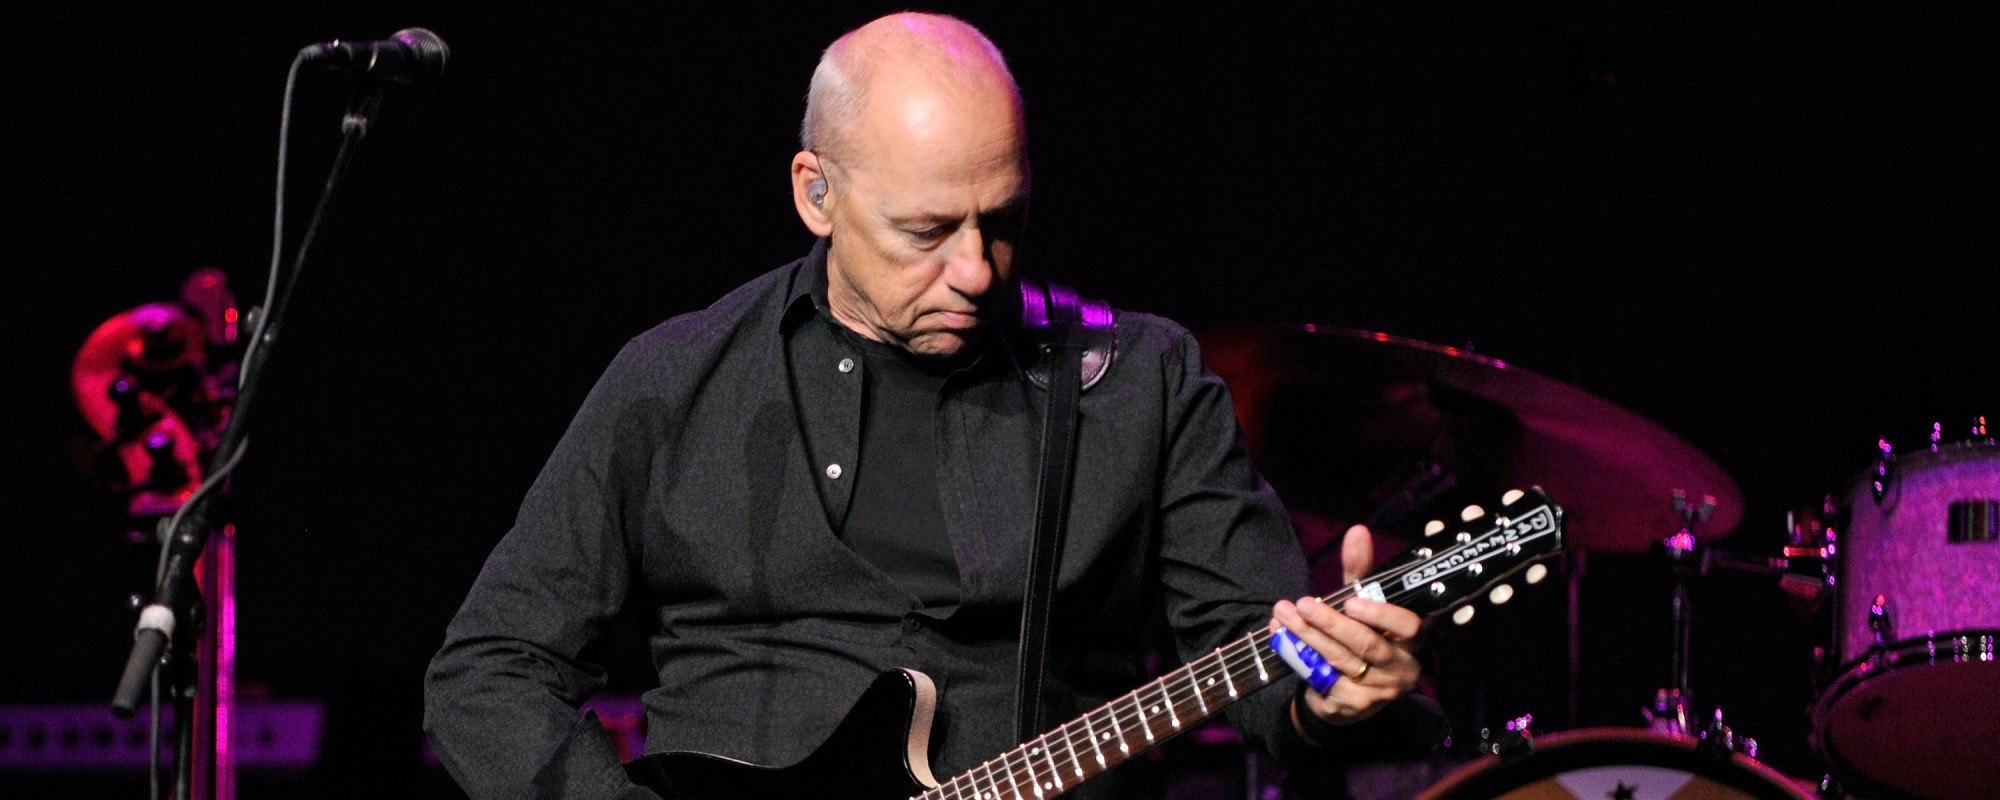 Mark Knopfler Thrills Fans with Announcement of New Solo Album, ‘One Deep River’: “So Happy I Could Cry!”